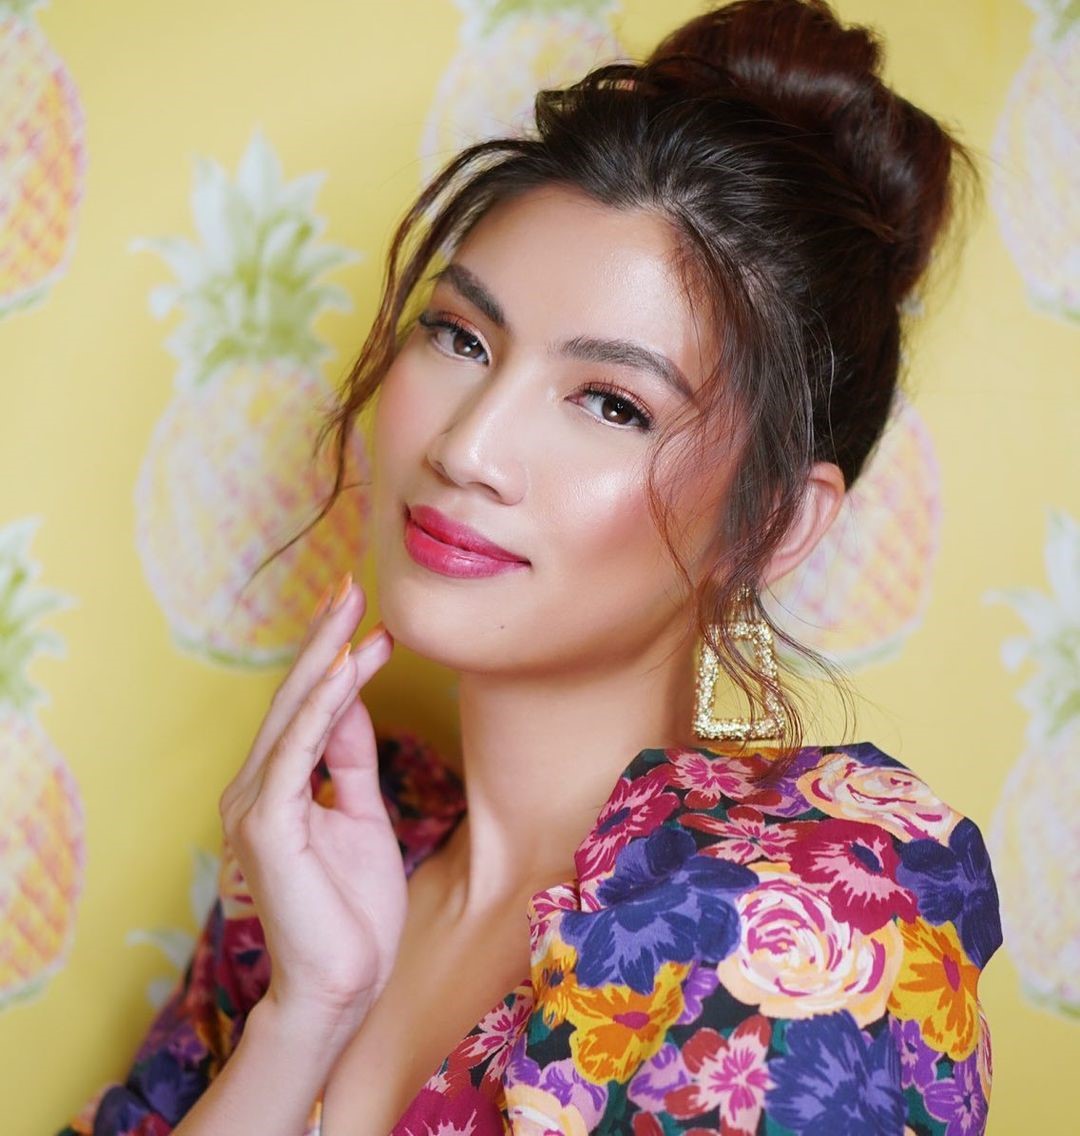 Catching up with Nicole Cordoves’ upgraded lifestyle at home: Rediscovering passions and mentoring a new generation of beauty queens